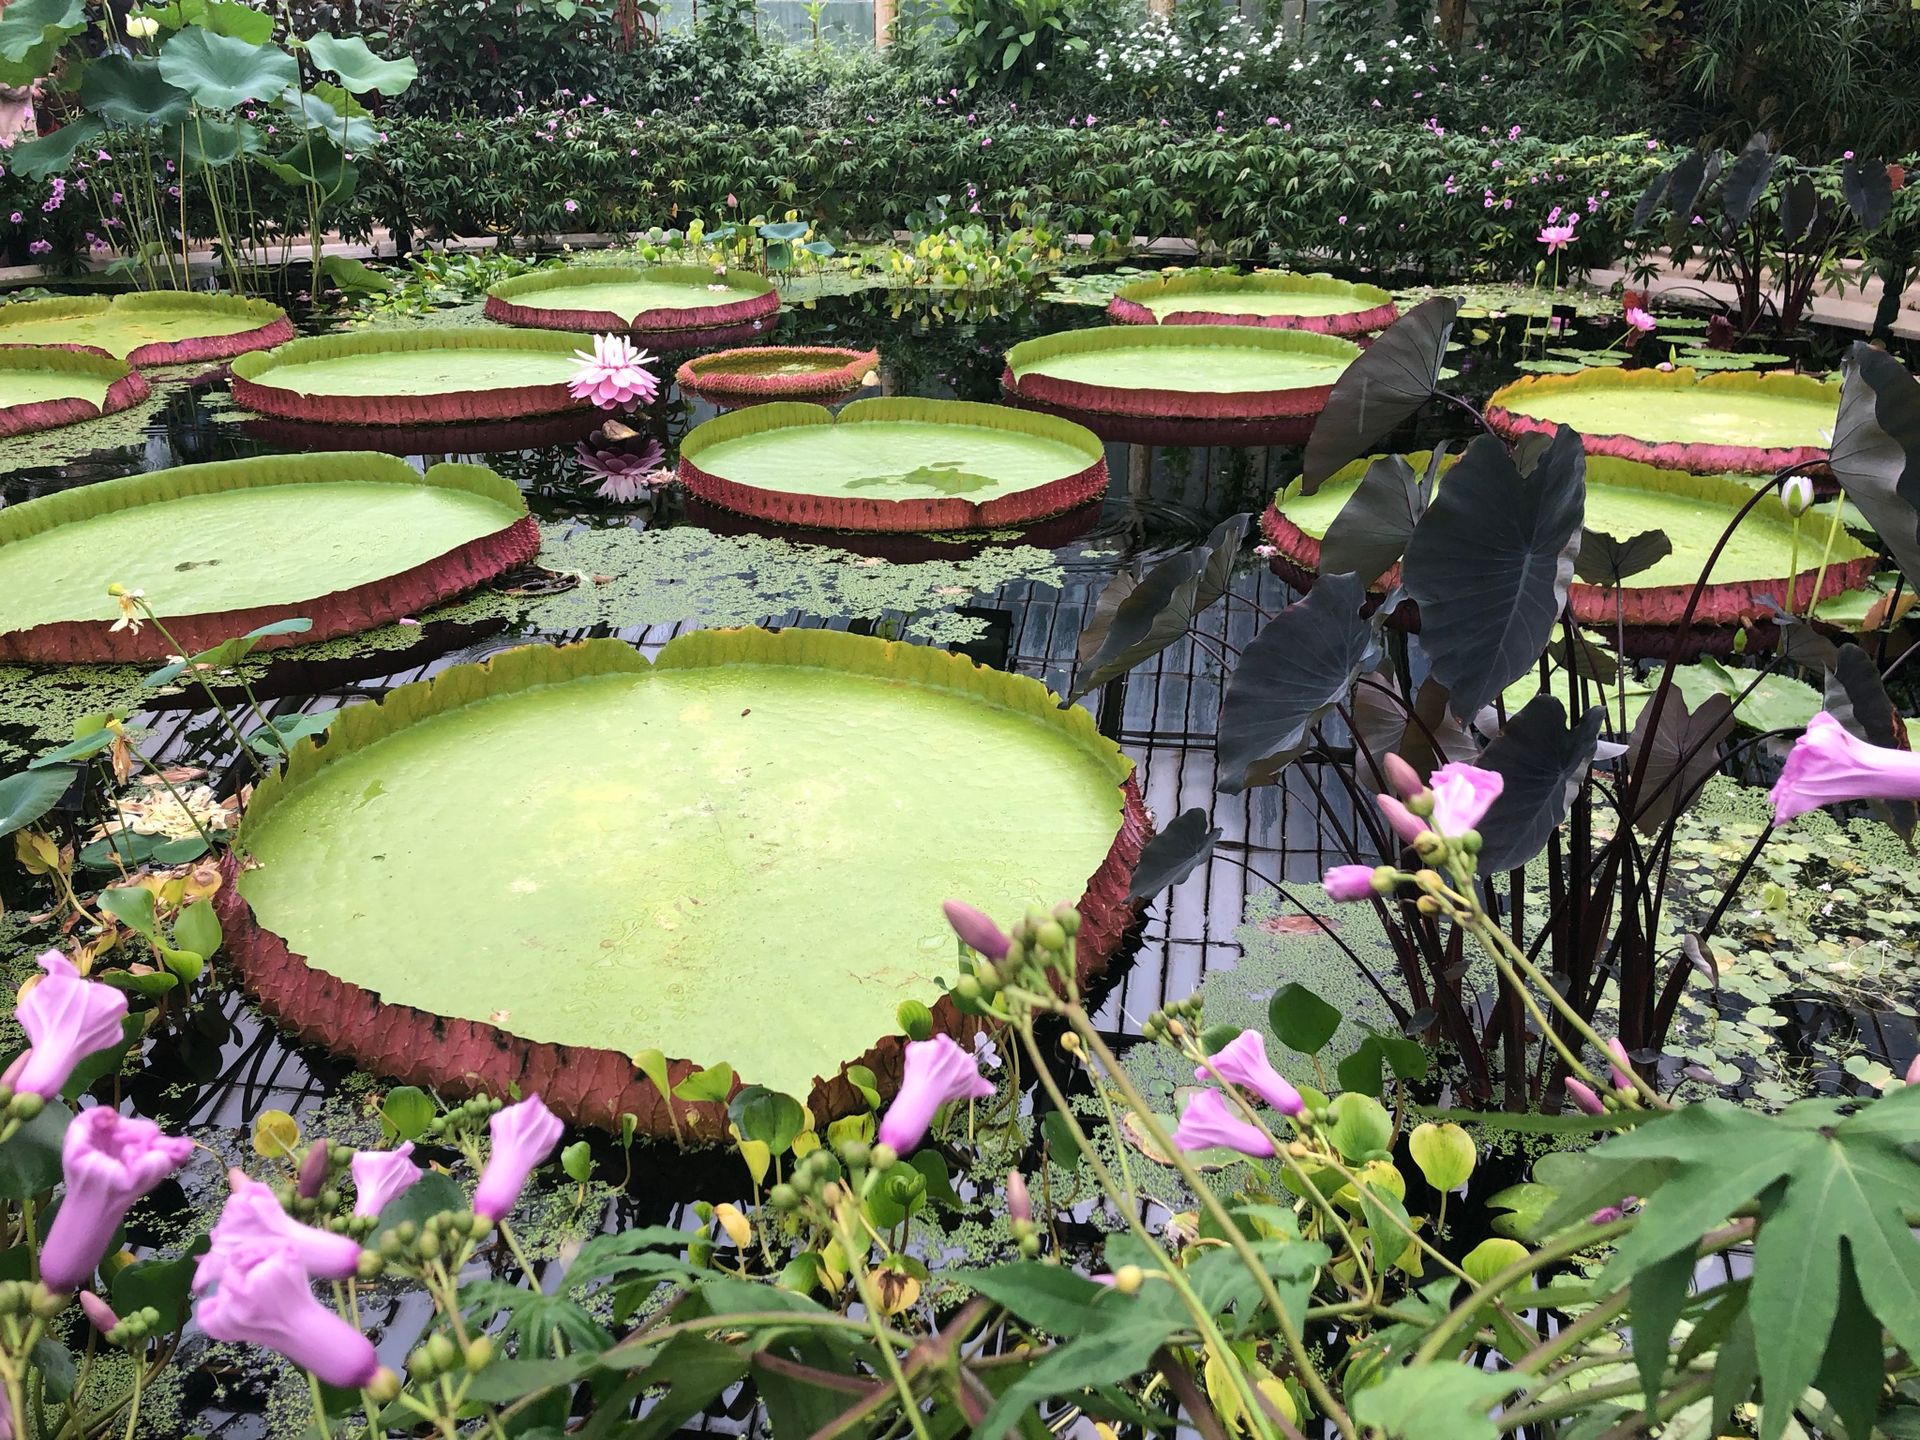 Giant water lilies on a pond in a greenhouse. Pink flowers in the foreground. Green plants surround the pond.